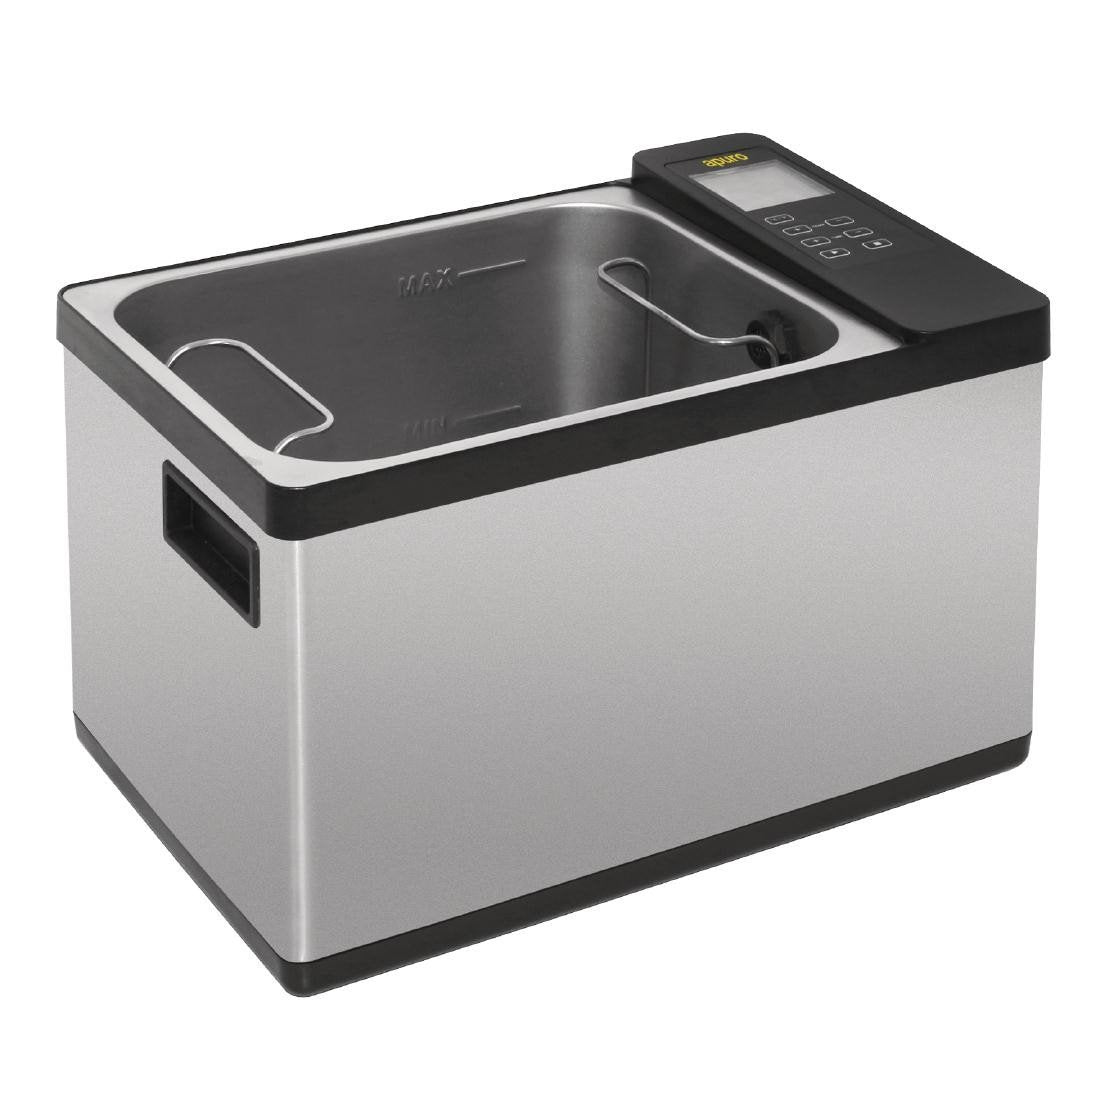 Sous Vide Water Bath Cooker for Home &amp; Commercial by Apuro Sous Vide Machine Apuro 